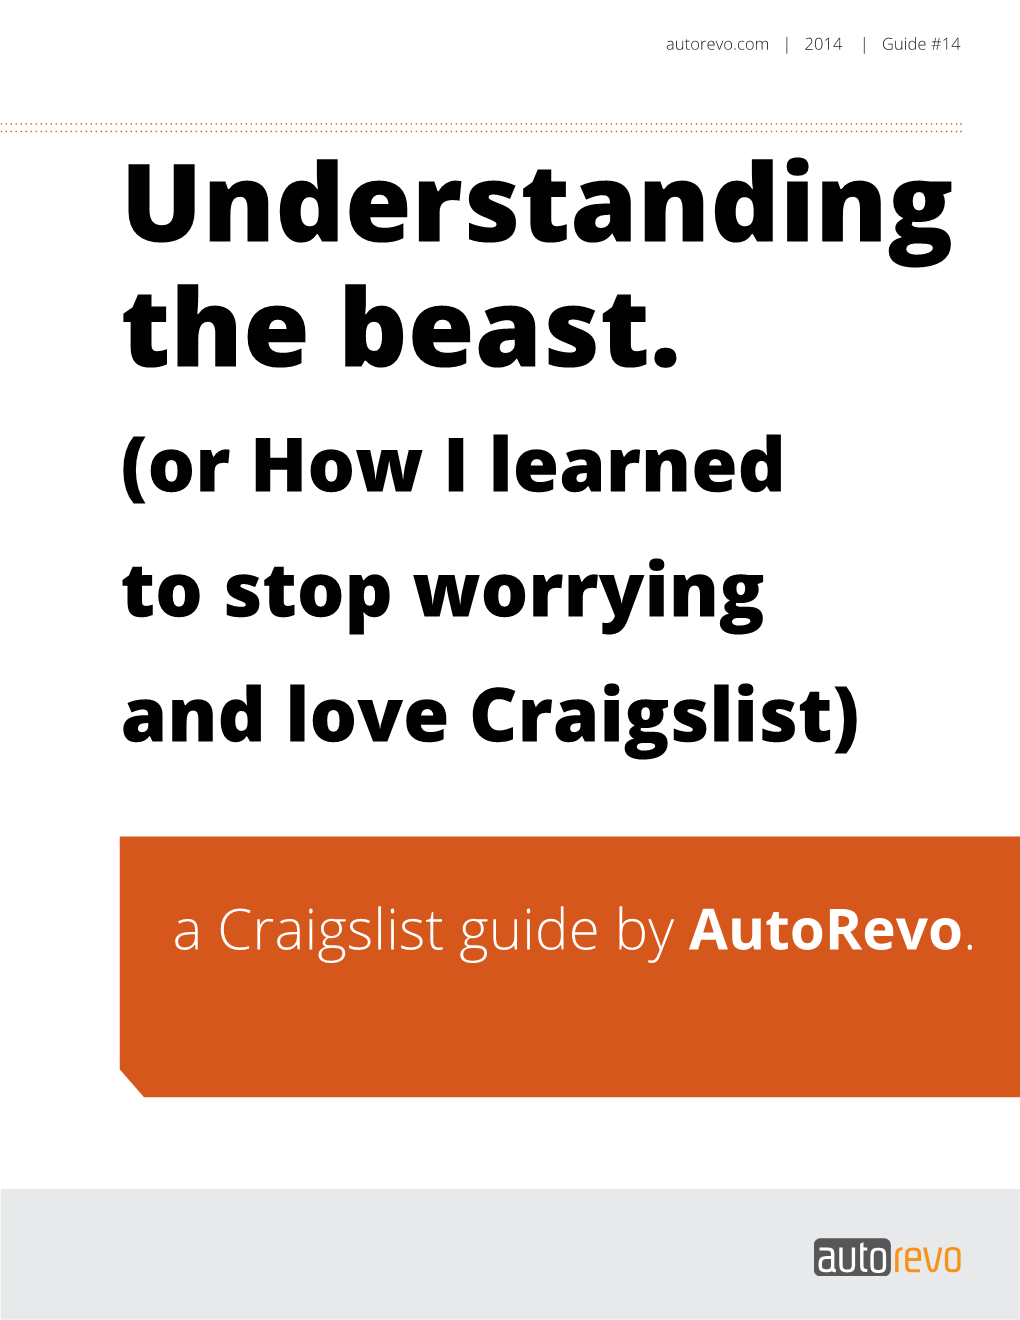 Understanding the Beast. (Or How I Learned to Stop Worrying and Love Craigslist)